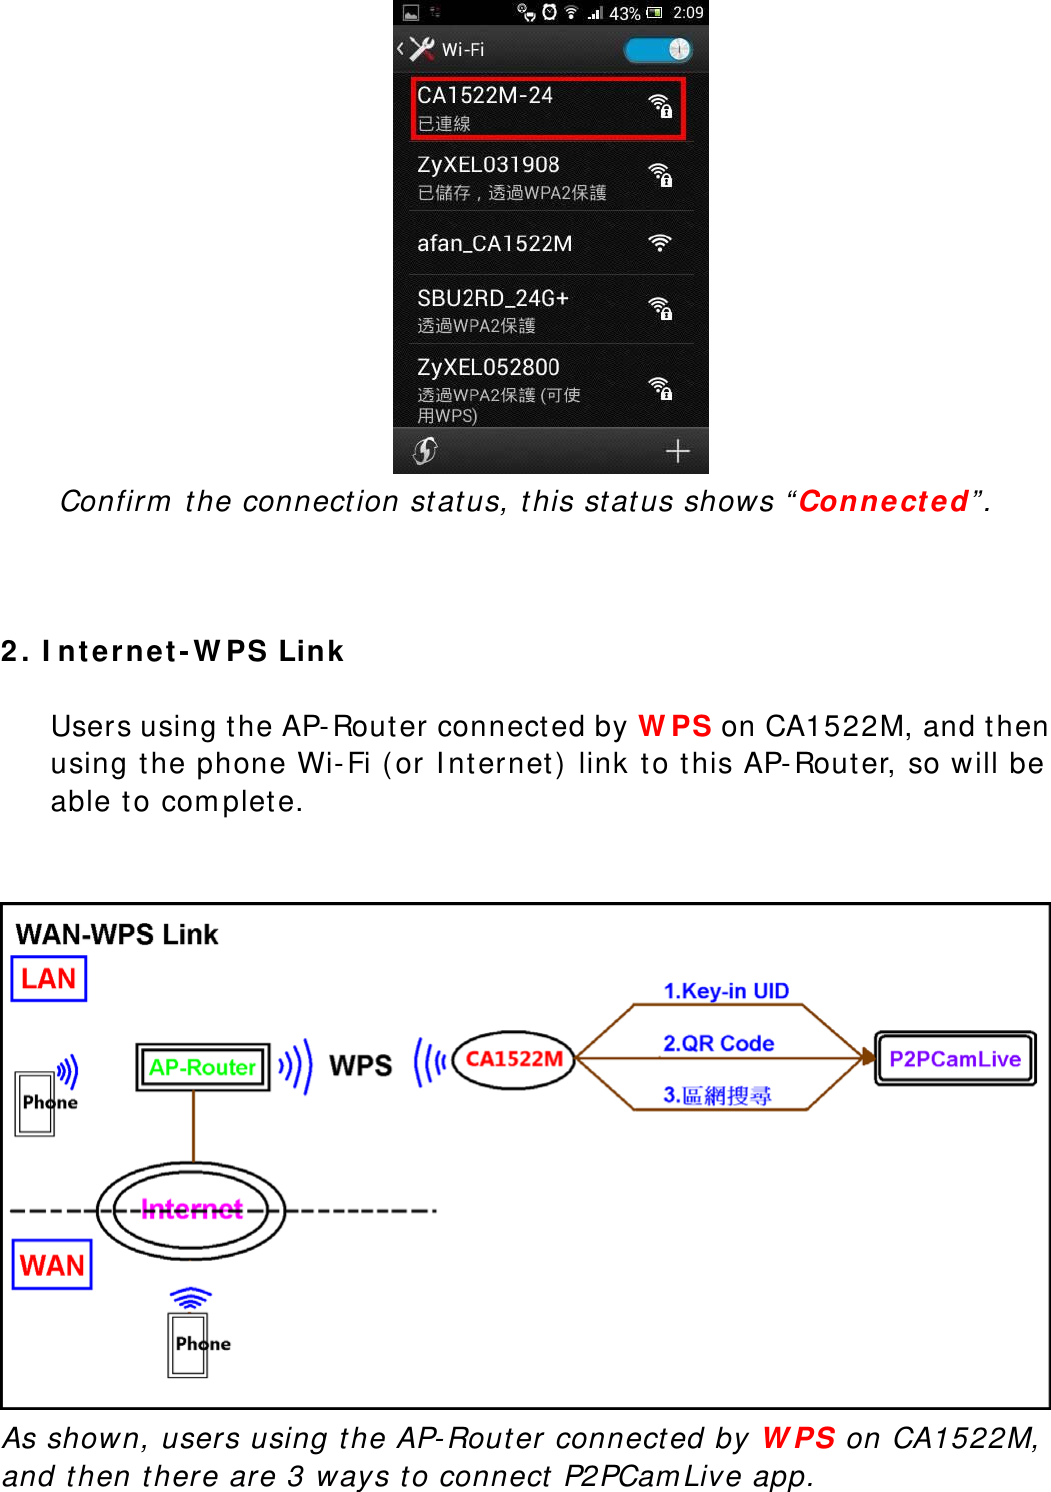  Confirm the connection status, this status shows “Connected”.    2. Internet-WPS Link  Users using the AP-Router connected by WPS on CA1522M, and then using the phone Wi-Fi (or Internet) link to this AP-Router, so will be able to complete.       As shown, users using the AP-Router connected by WPS on CA1522M, and then there are 3 ways to connect P2PCamLive app. 